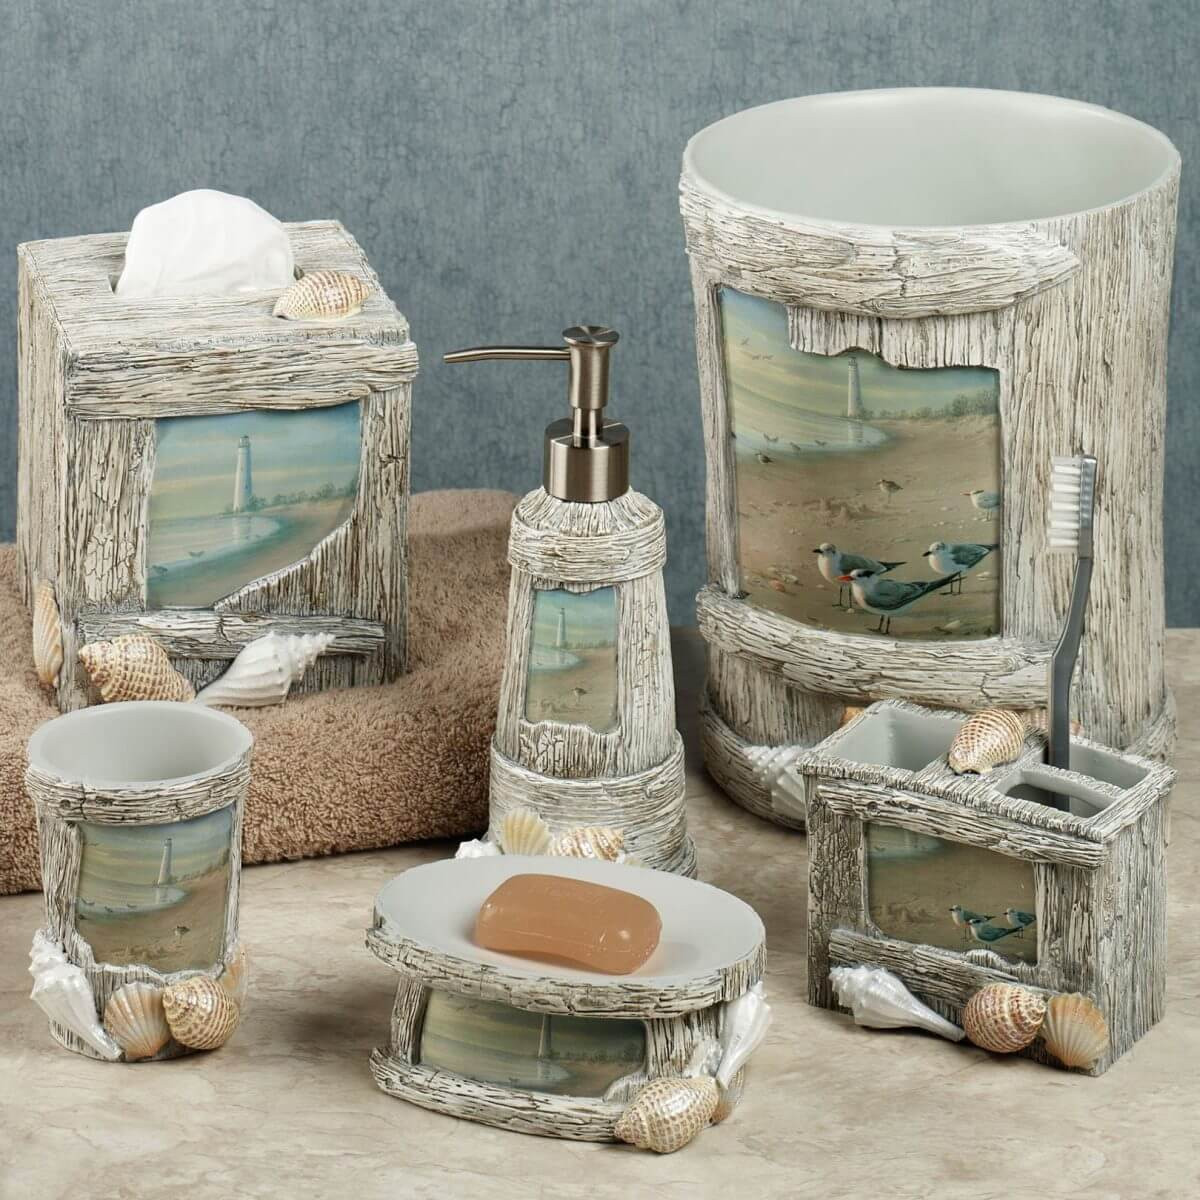 Seashell Bathroom Decor
 Seashell Bathroom Decor To Bring the Beach Home Interior